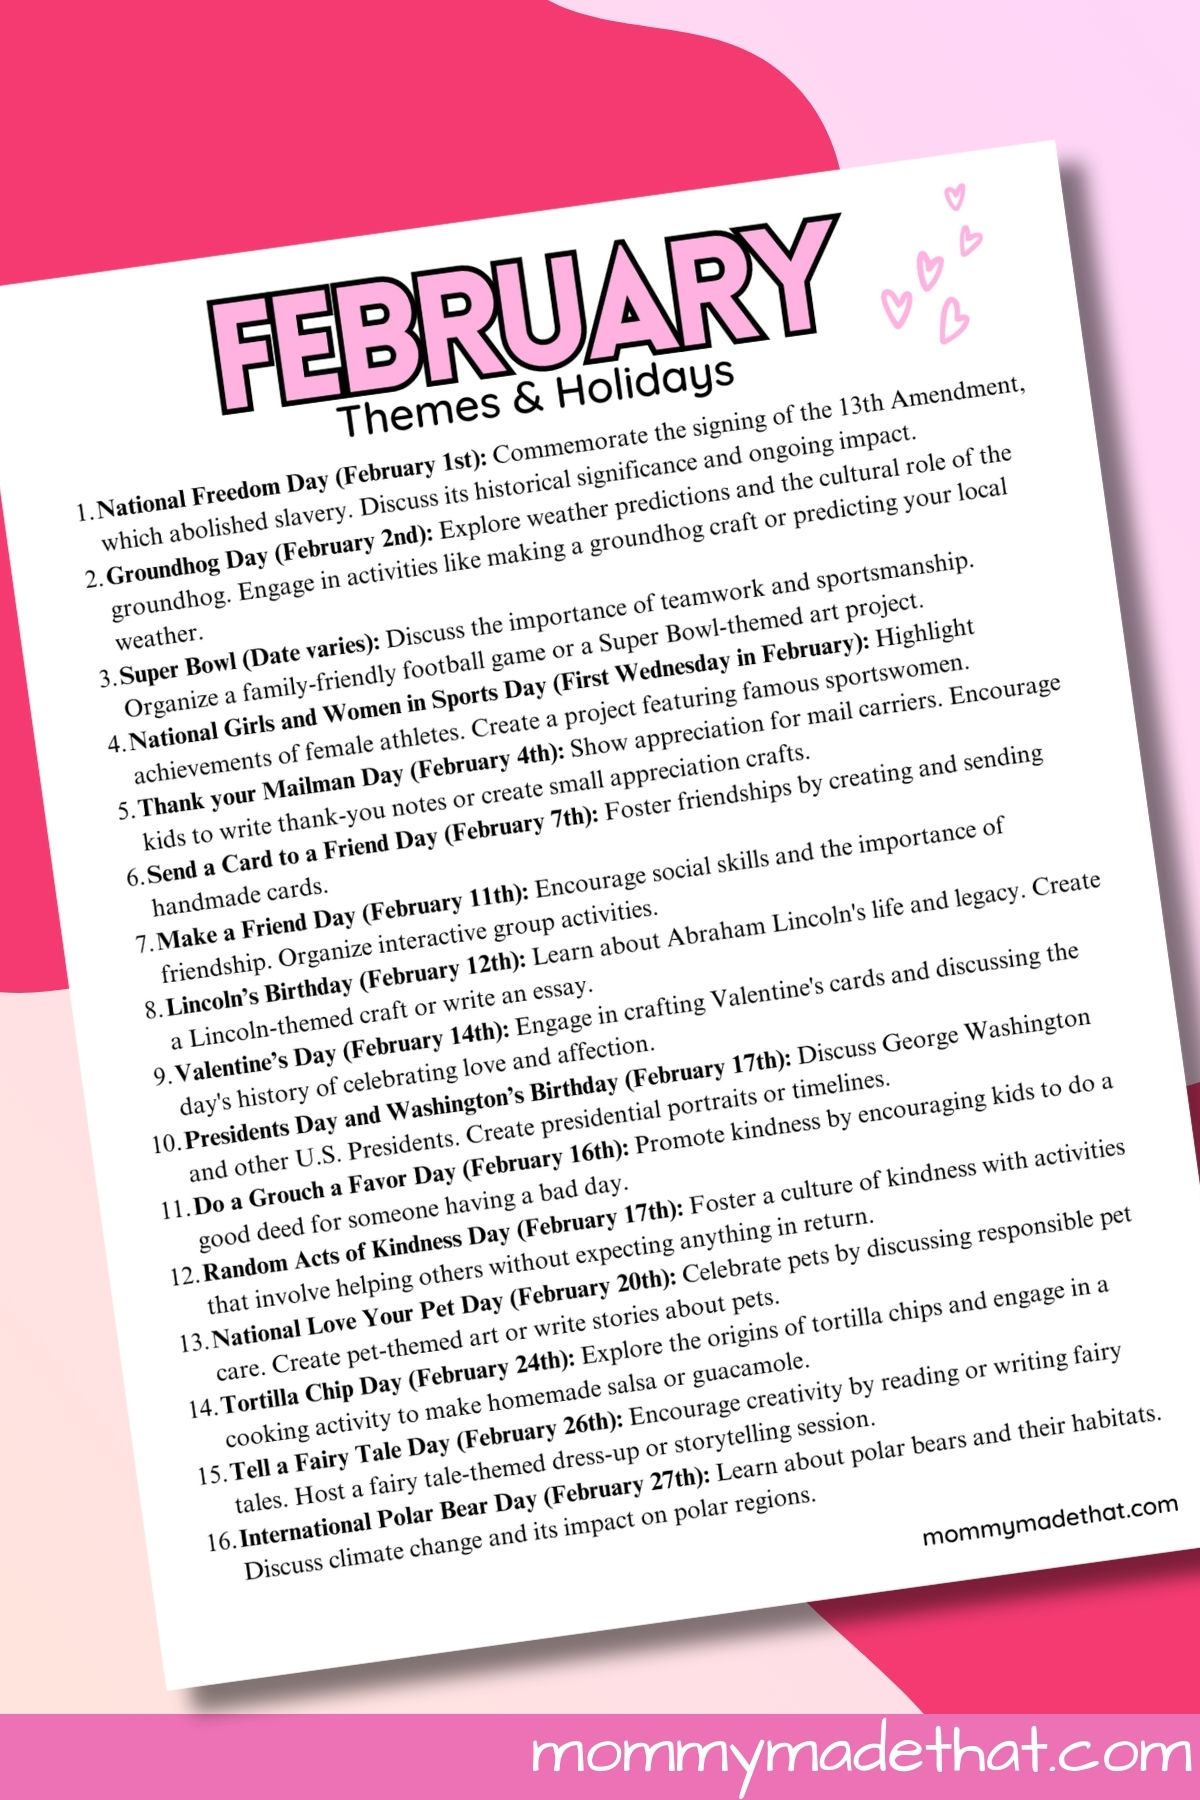 February Themes and Holidays.